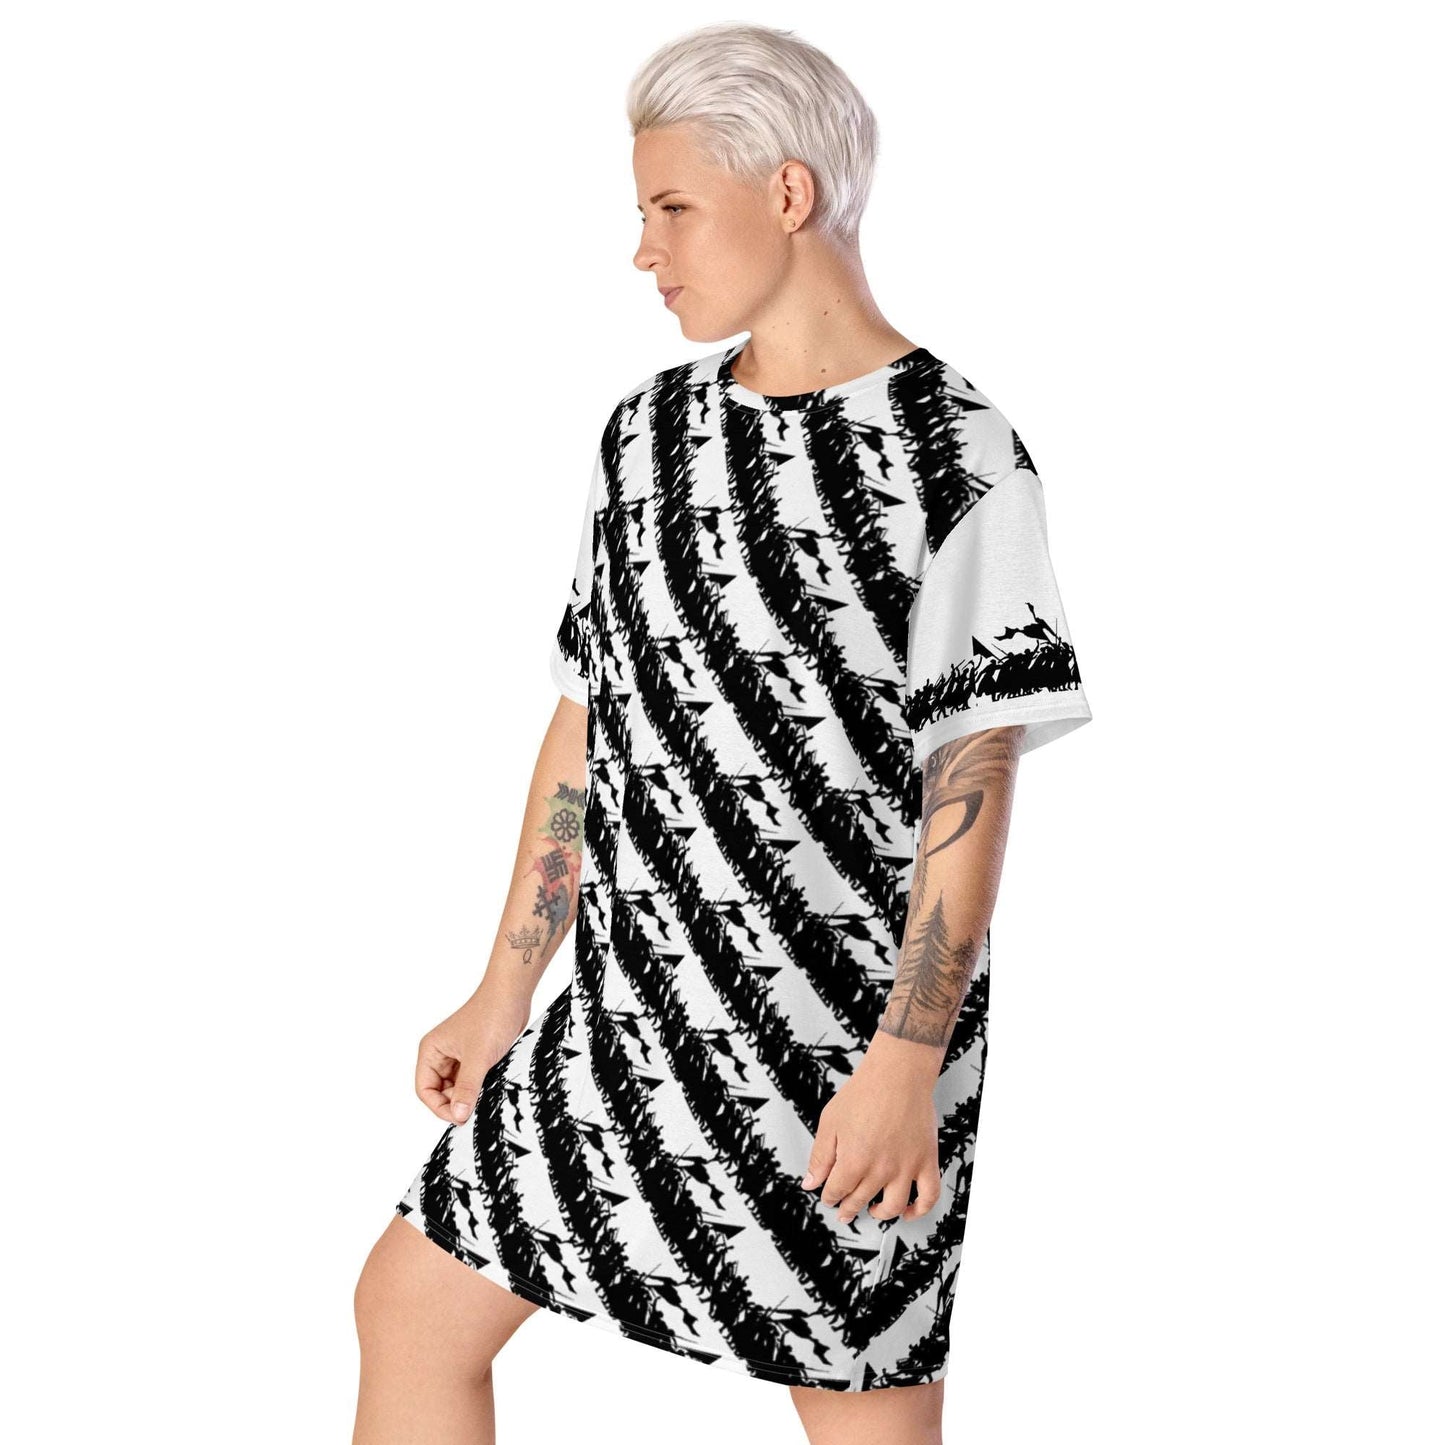 Protest - All-Over Print Dress - Souled Out World